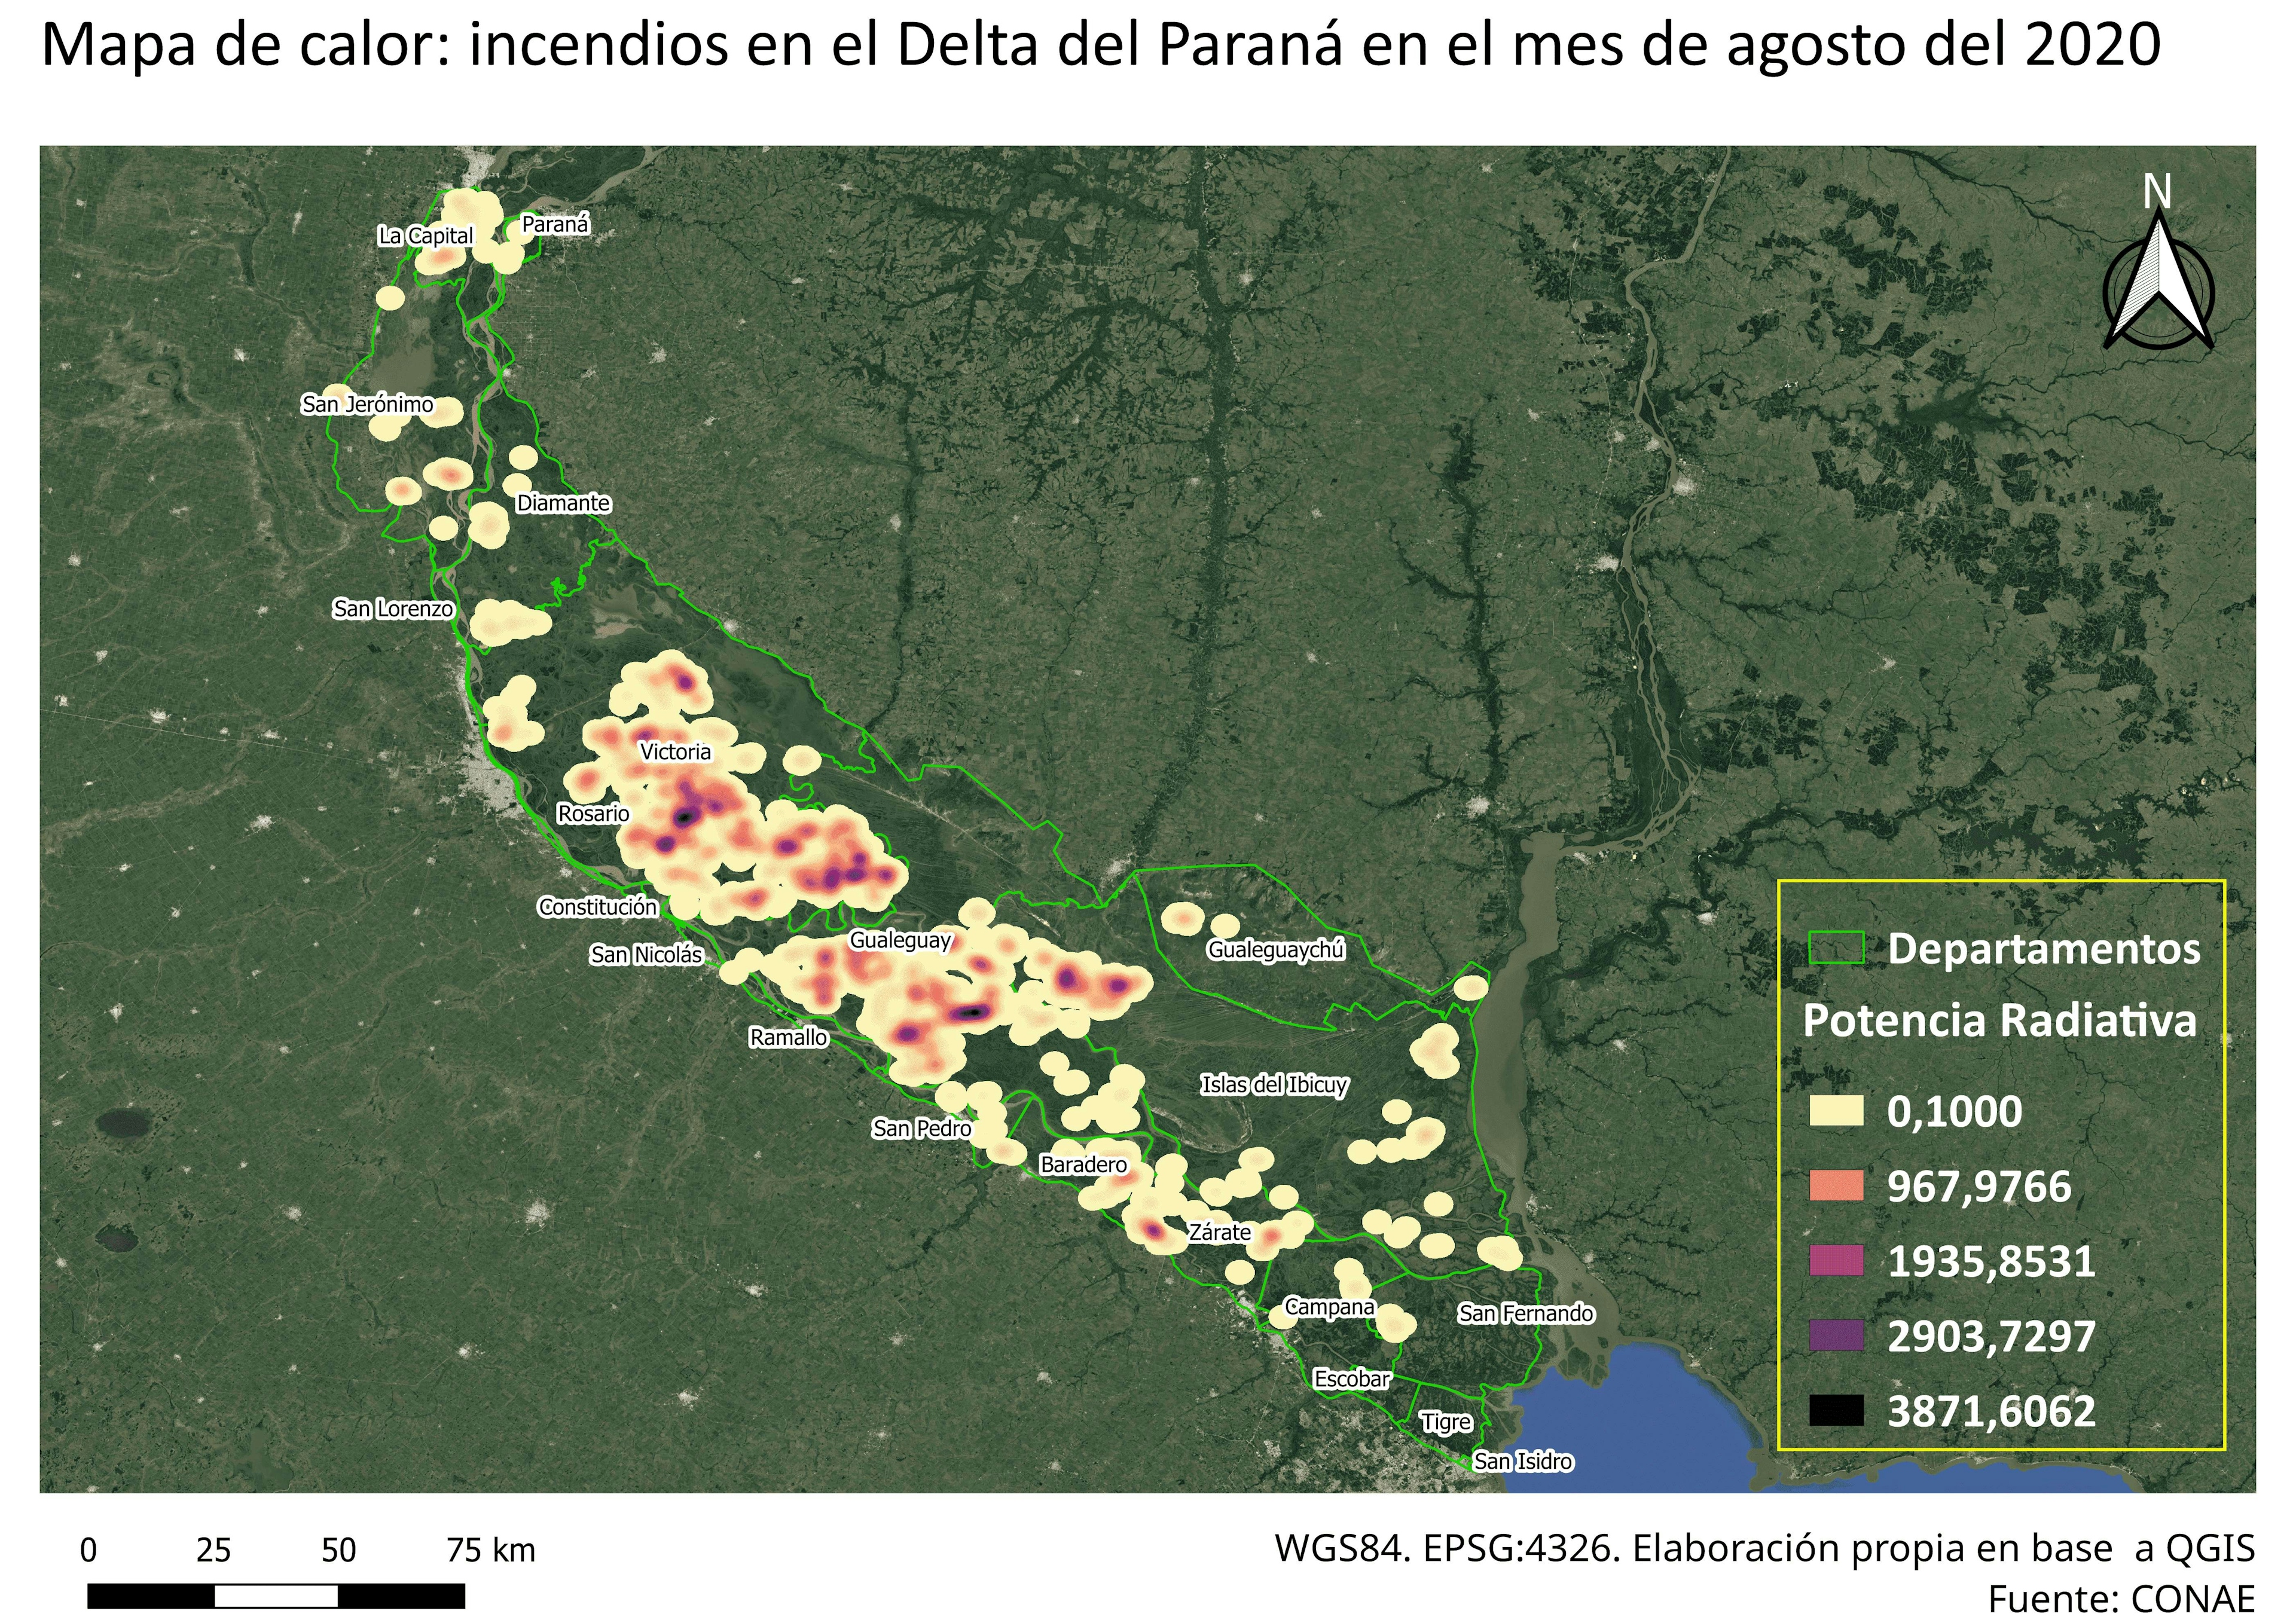 Paraná Delta's fires in august 2020